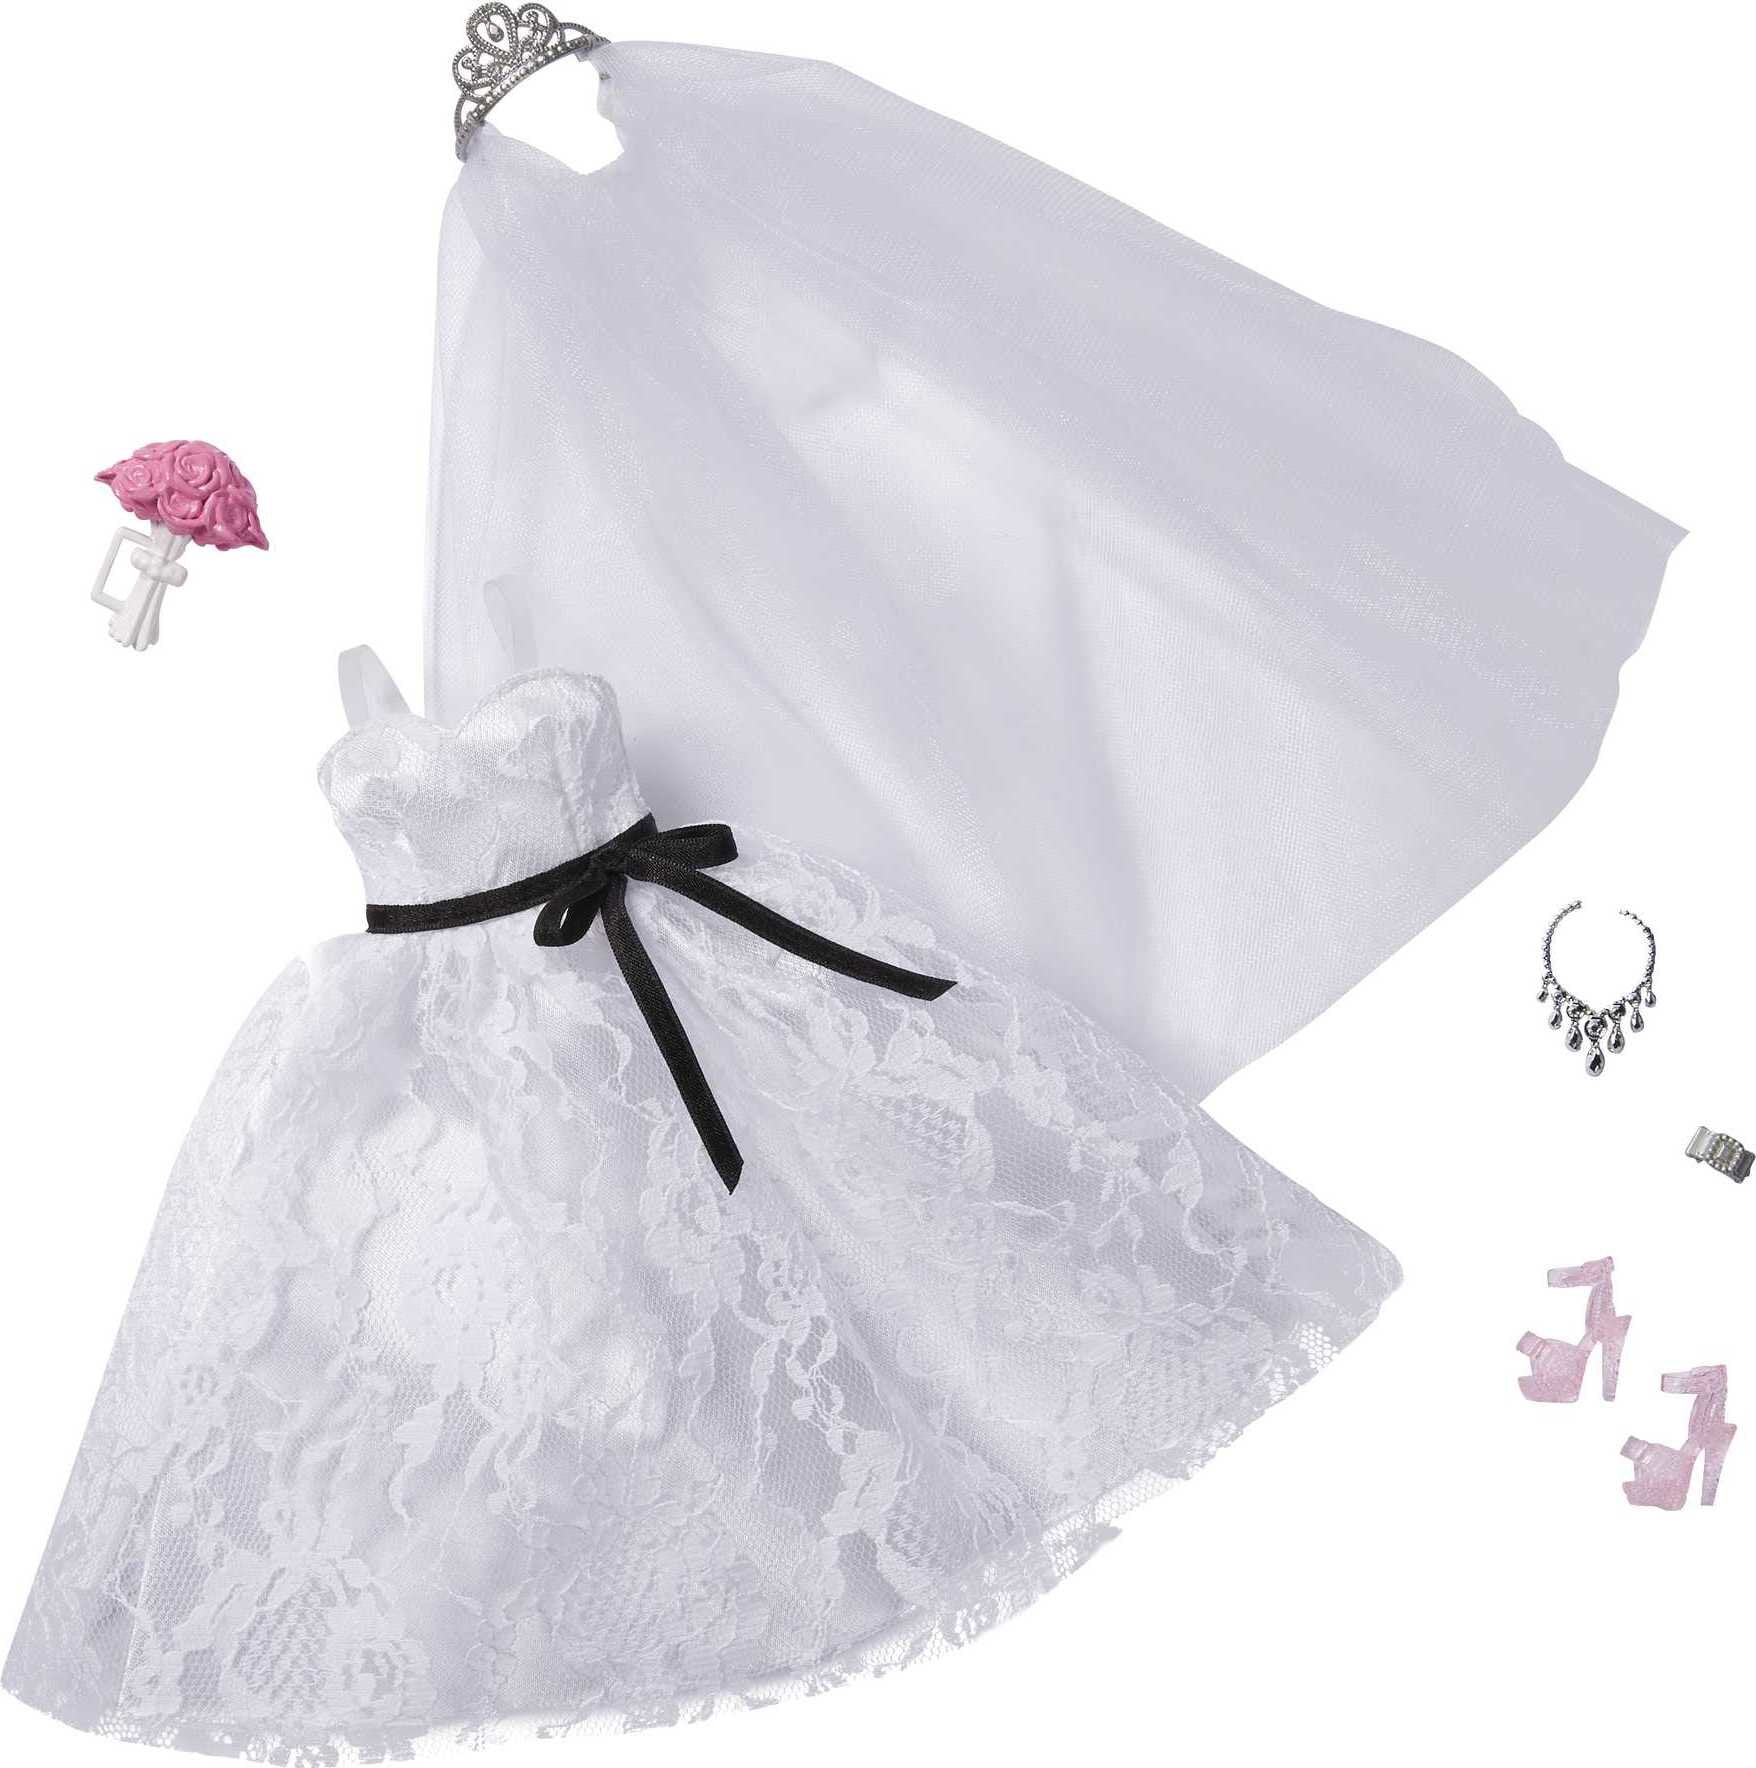 Barbie Fashion Pack: Bridal Outfit for Barbie Doll with Wedding Dress & 5 Accessories